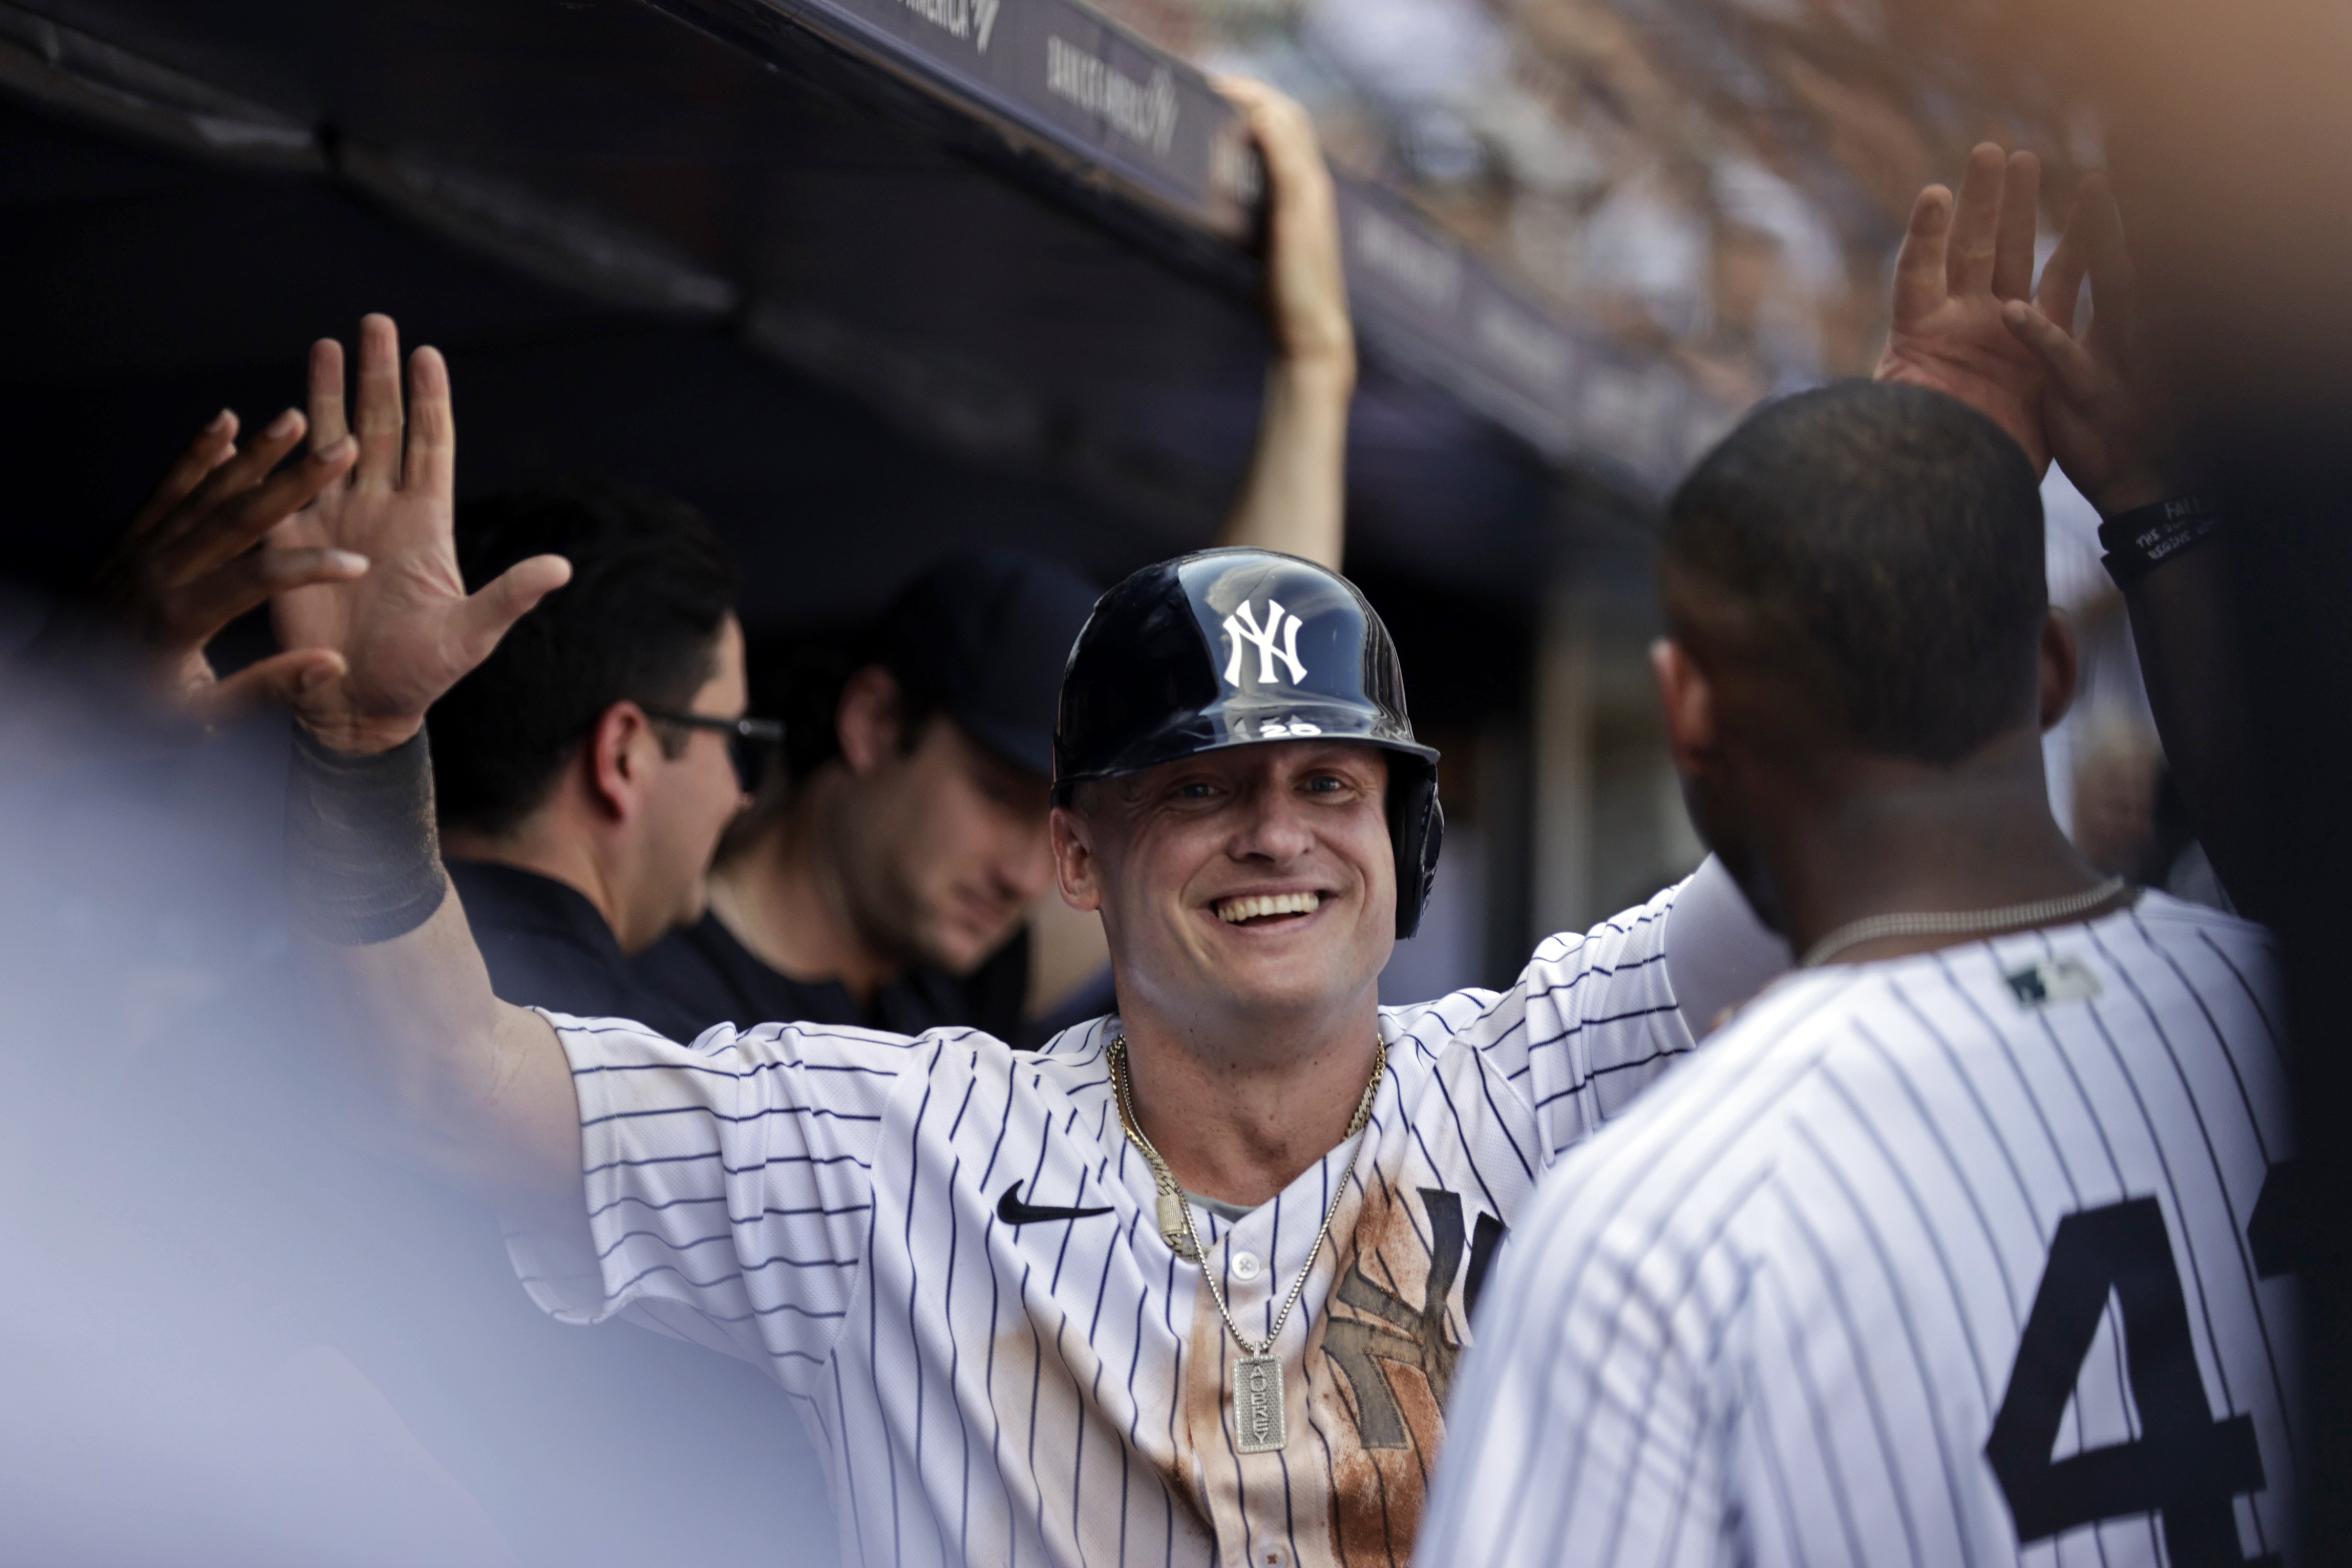 With 1 swing, Yankees remind Rays what they do best: Break hearts